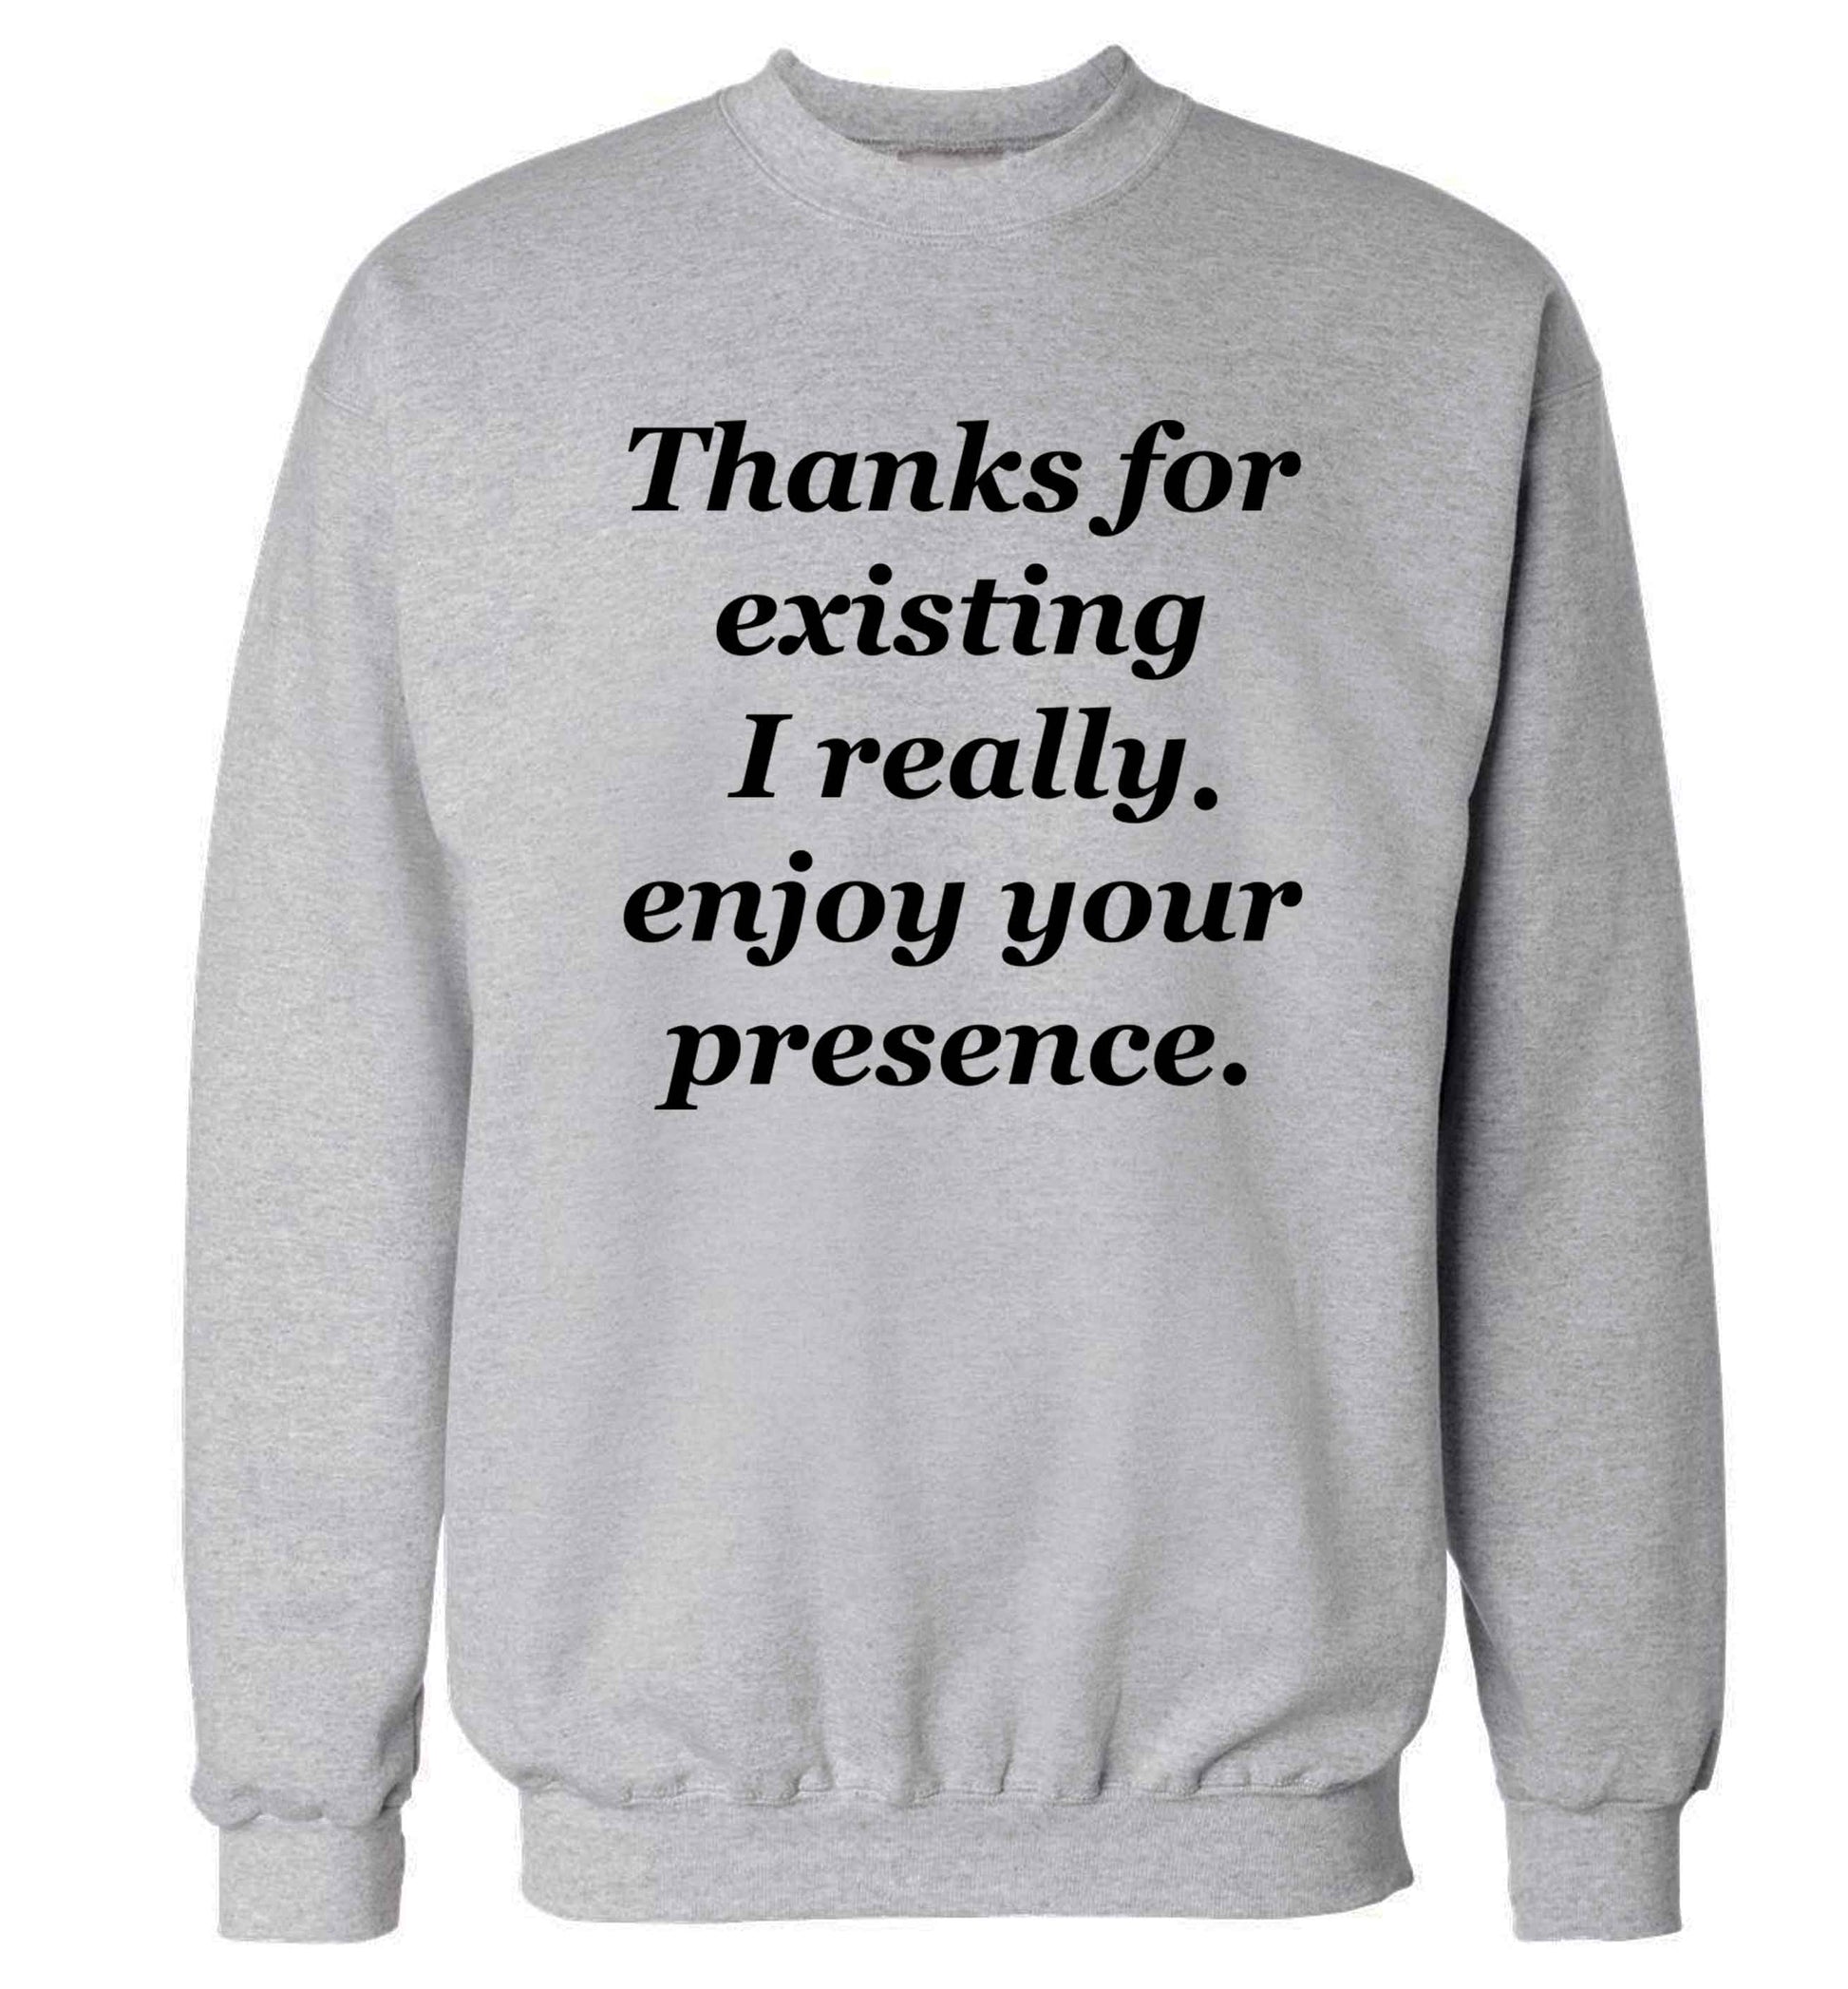 Thanks for existing I really enjoy your presence Adult's unisex grey Sweater 2XL